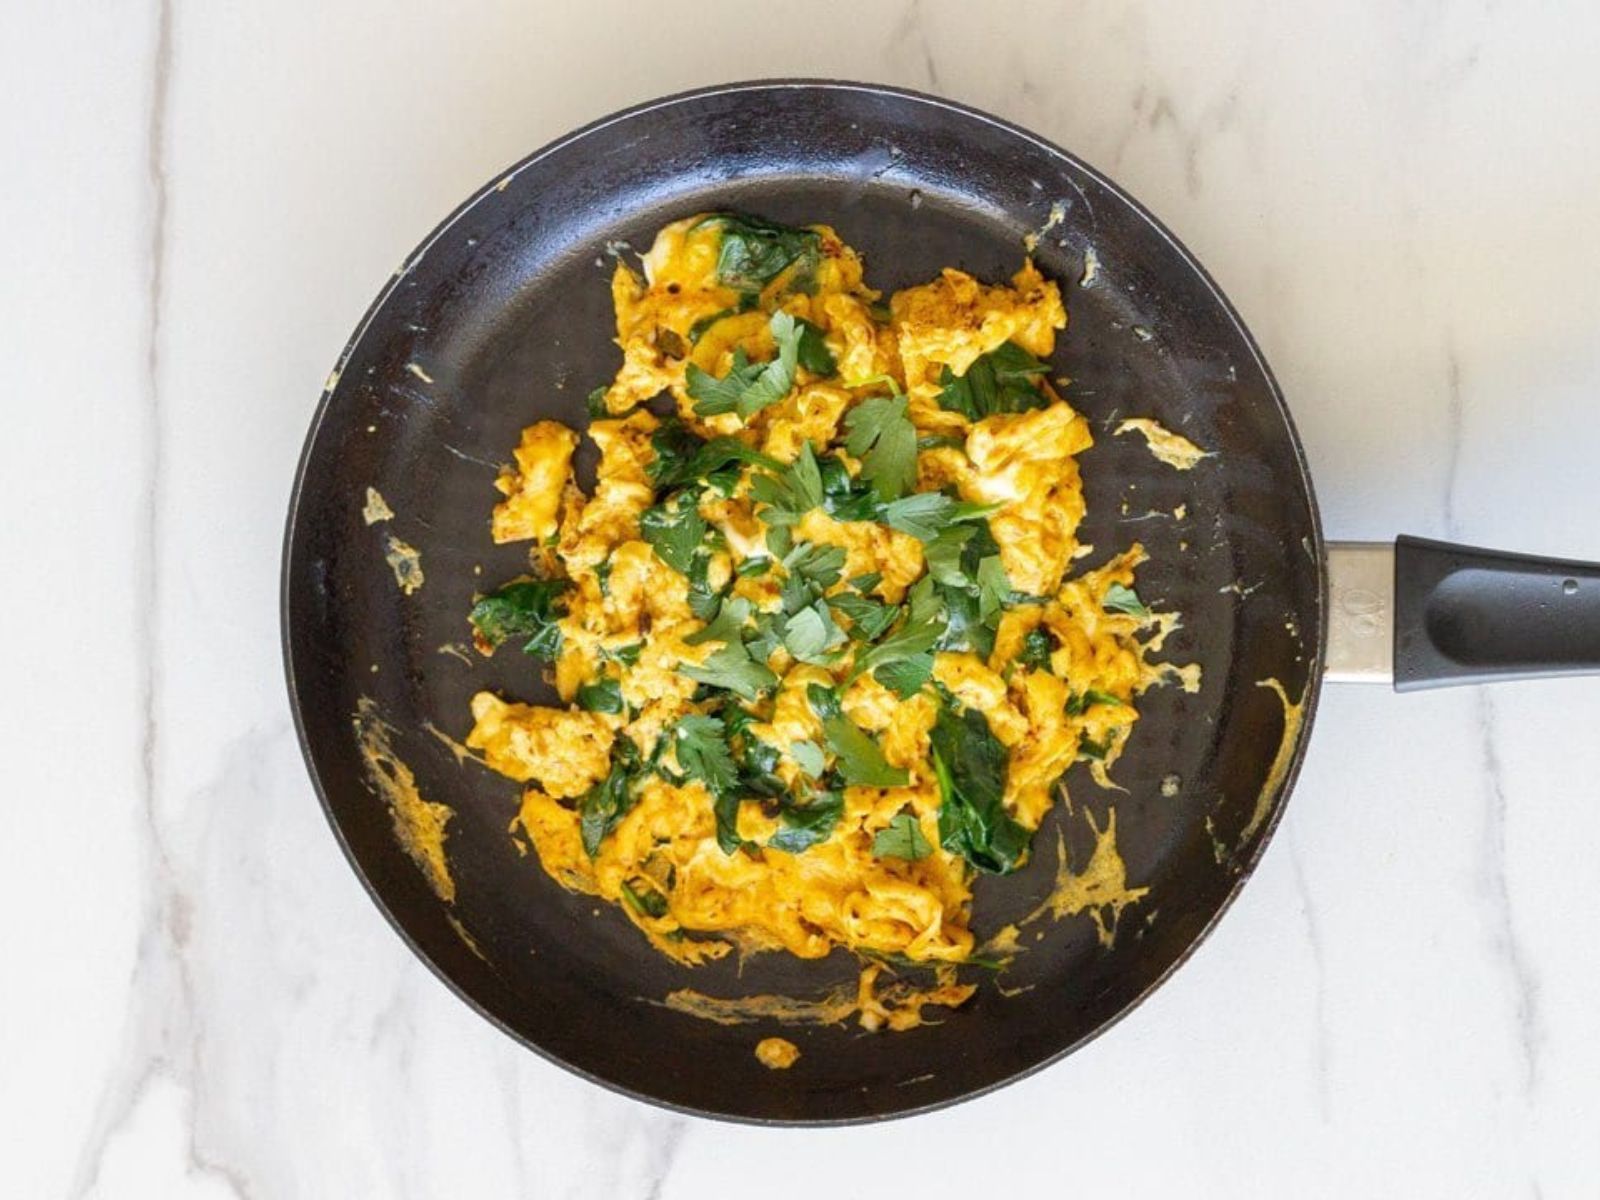 Low-carb breakfast recipes, tumeric Scrambled Eggs, Courtesy of Honest Cooking